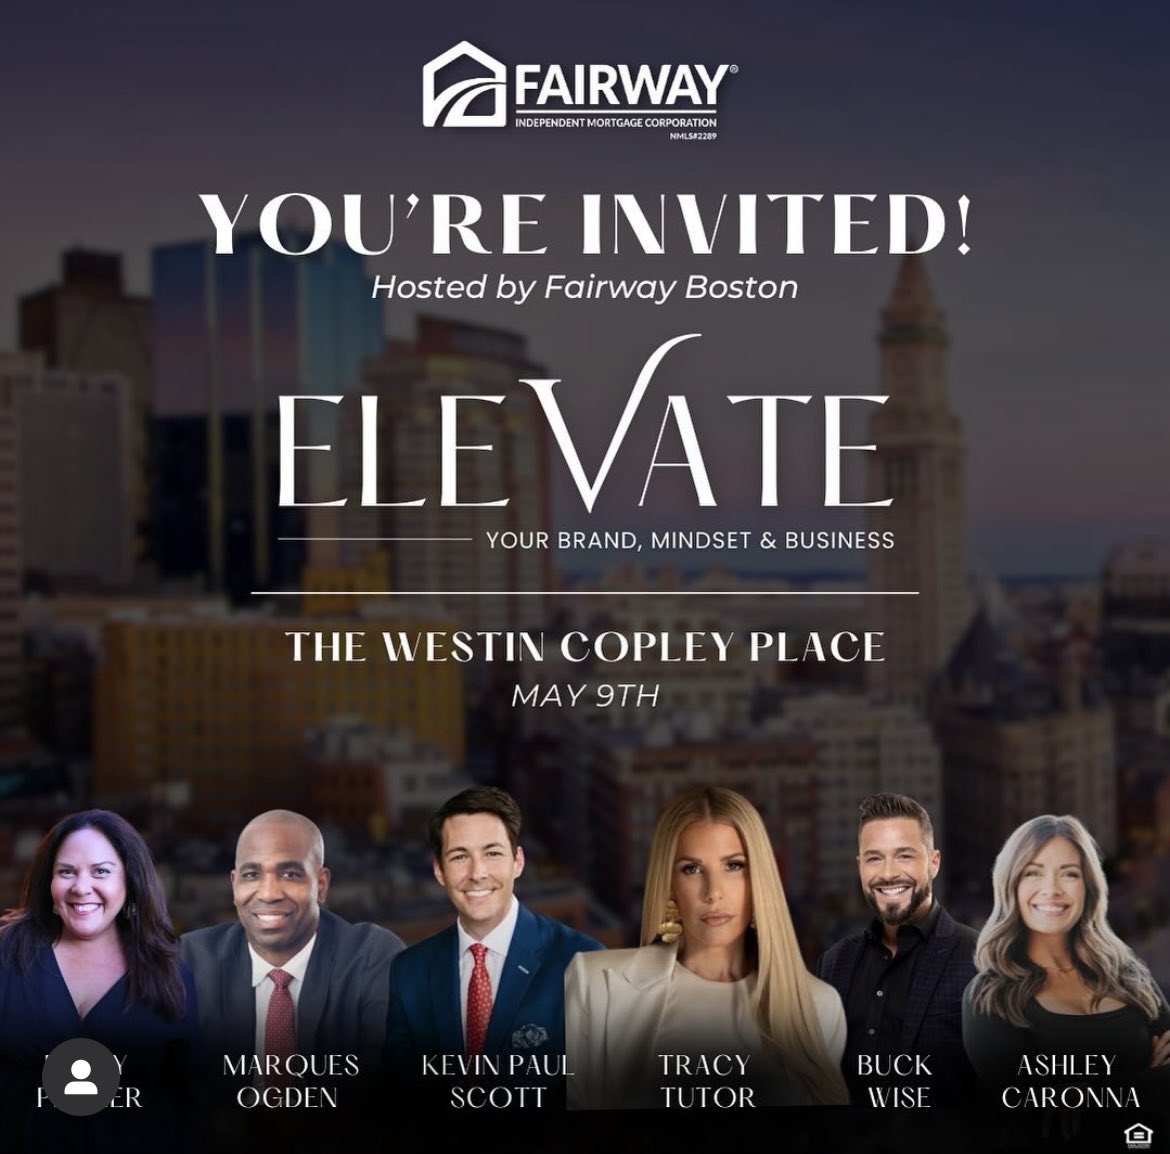 Cultivating and sustaining an Unbreakable Mindset, is critical to succeed in business and in life! Our brand is excited to be heading to Boston next month to speak for one of our premier clients Fairway Independent Mortgage Corporation To connect with us marques360.com